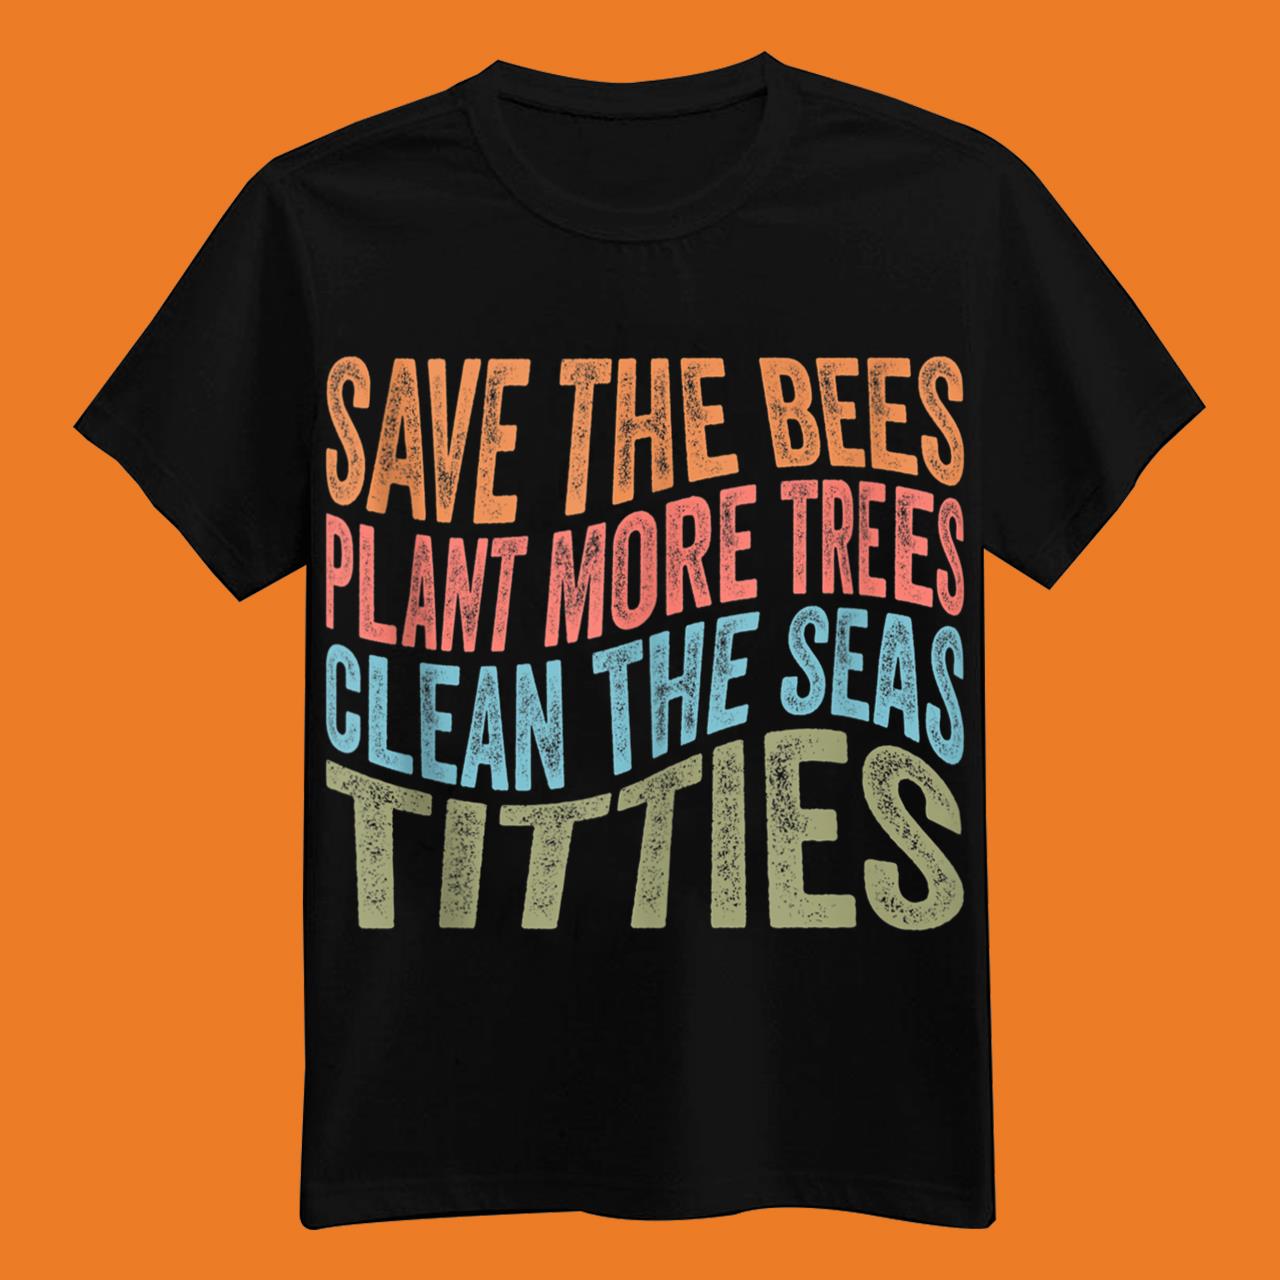 Save The Bees Plant More Trees Clean The Seas Titties Vintage Funny Shirt